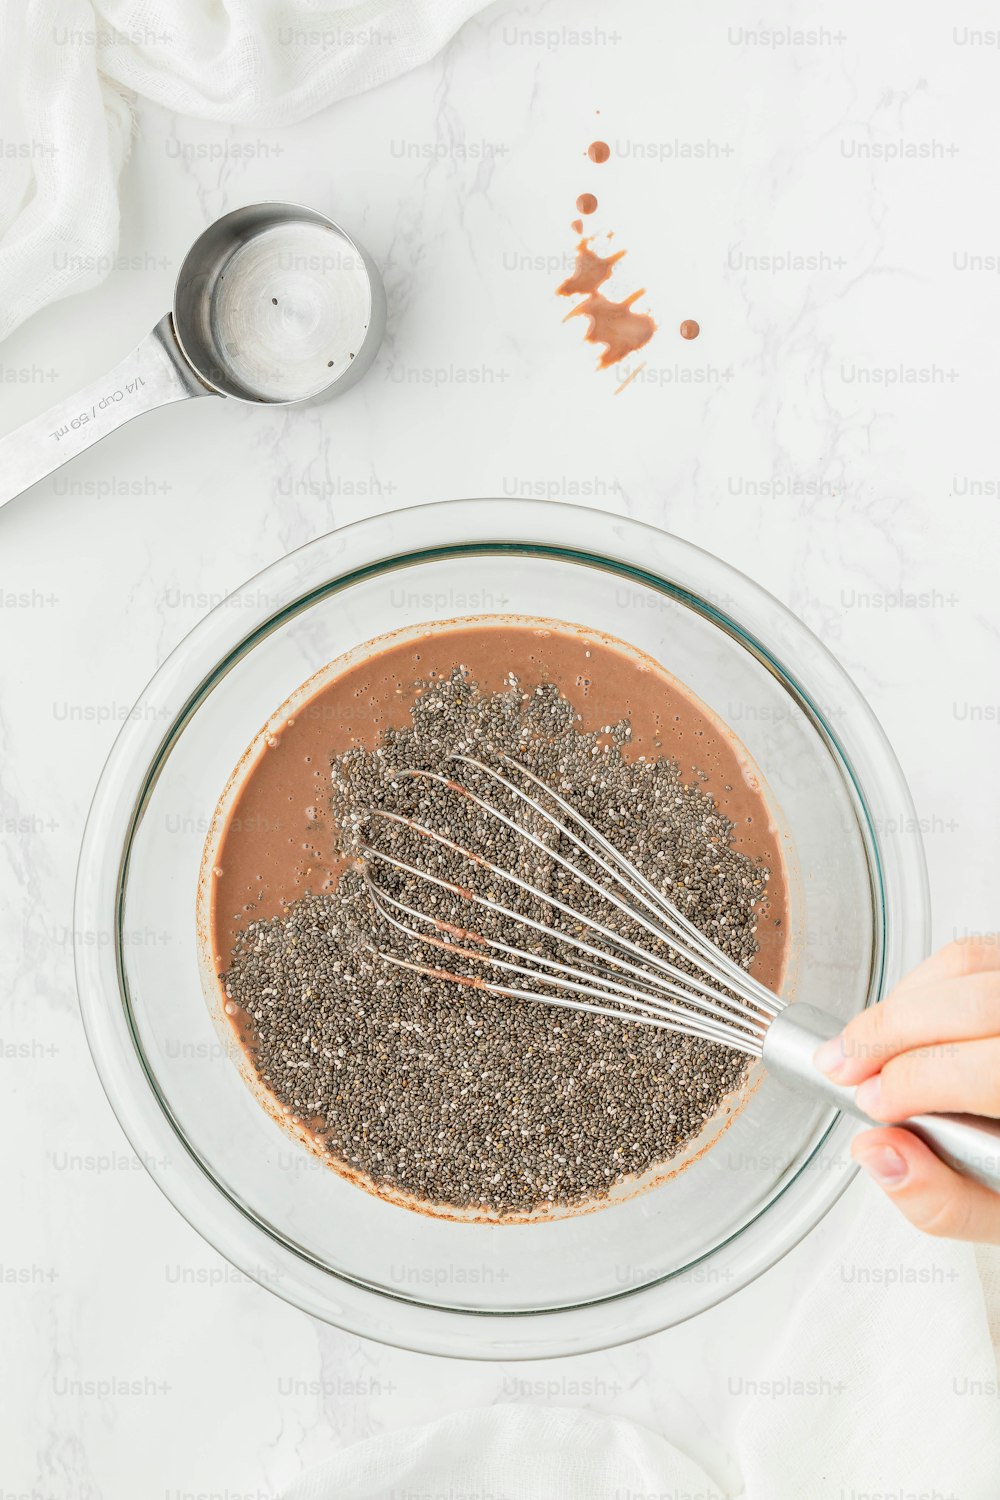 a person whisking chia seeds in a bowl